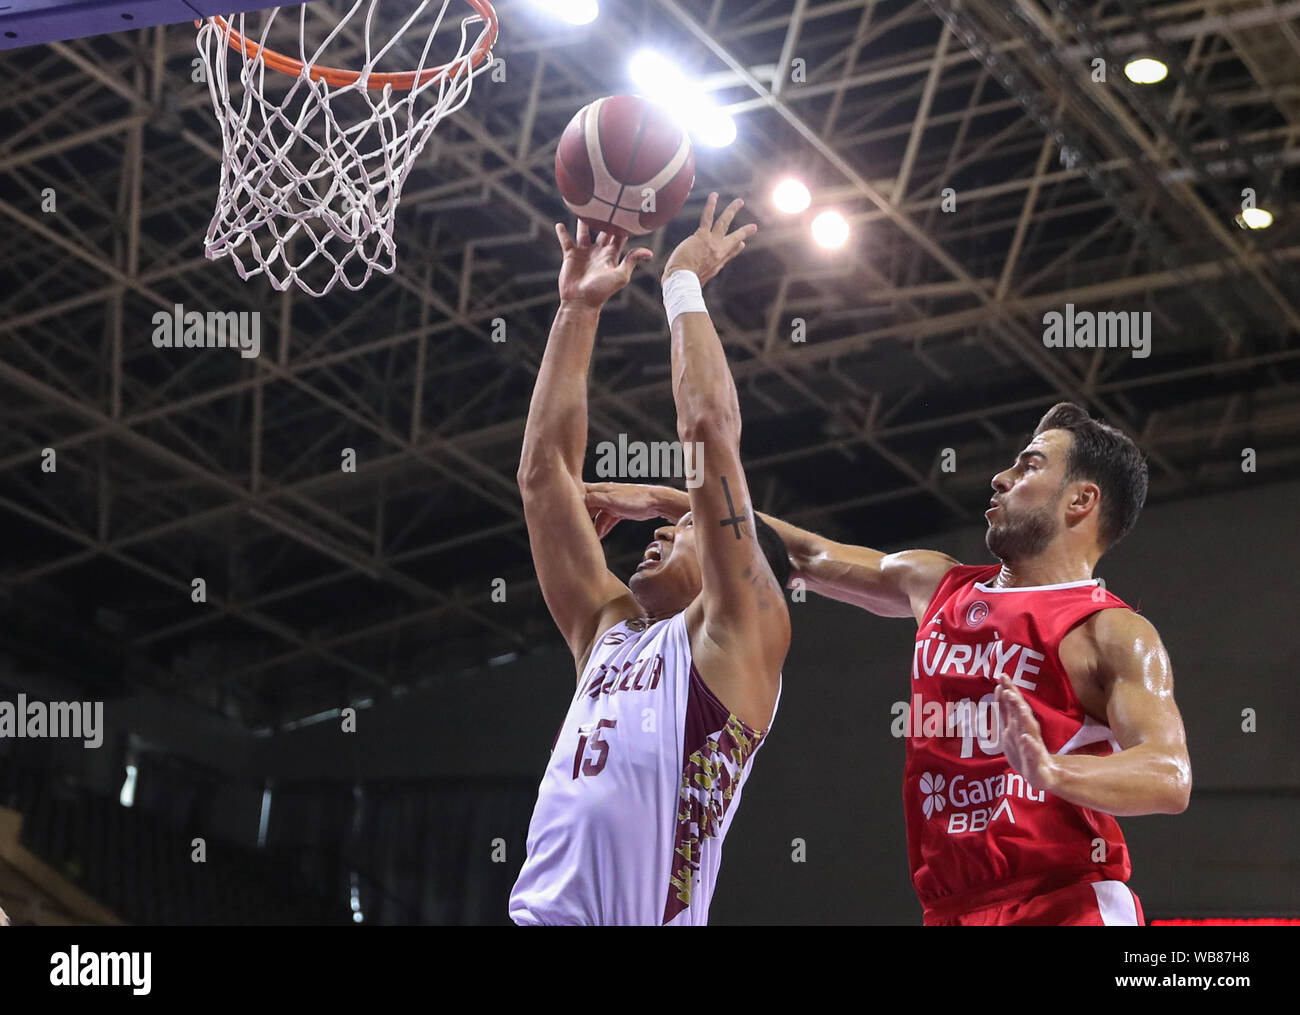 Suzhou, China's Jiangsu Province. 25th Aug, 2019. Venezuela's Windi Graterol (L) goes for a basket during a match against Turkey at the 2019 Suzhou International Basketball Challenge and Culture Week in Suzhou, east China's Jiangsu Province, Aug. 25, 2019. Credit: Yang Lei/Xinhua/Alamy Live News Stock Photo